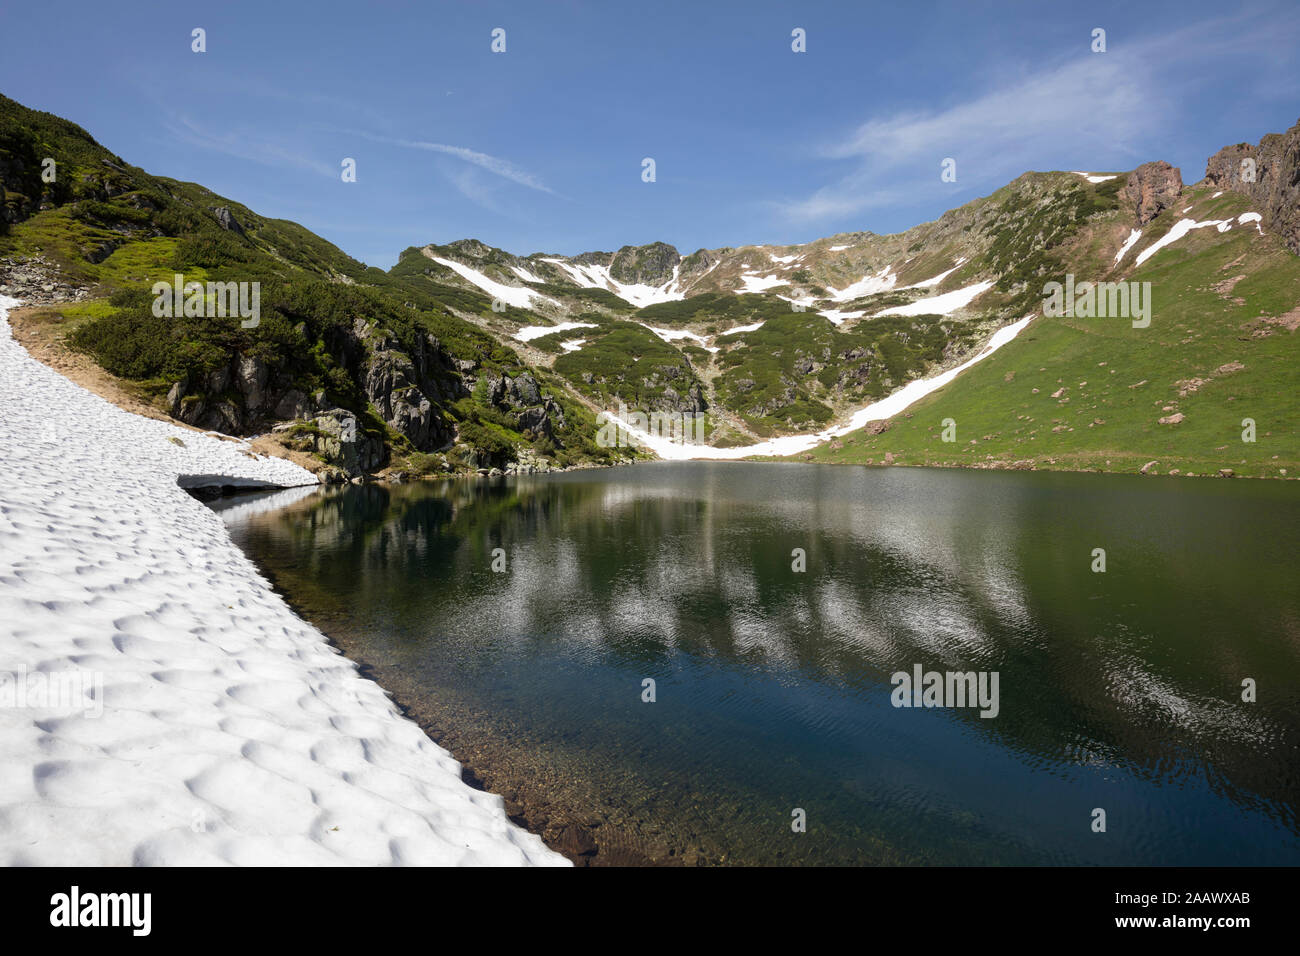 Scenic view of Wildseelodersee and mountain during winter at Fieberbrunn, Kitzbühel, Tyrol, Austria Stock Photo